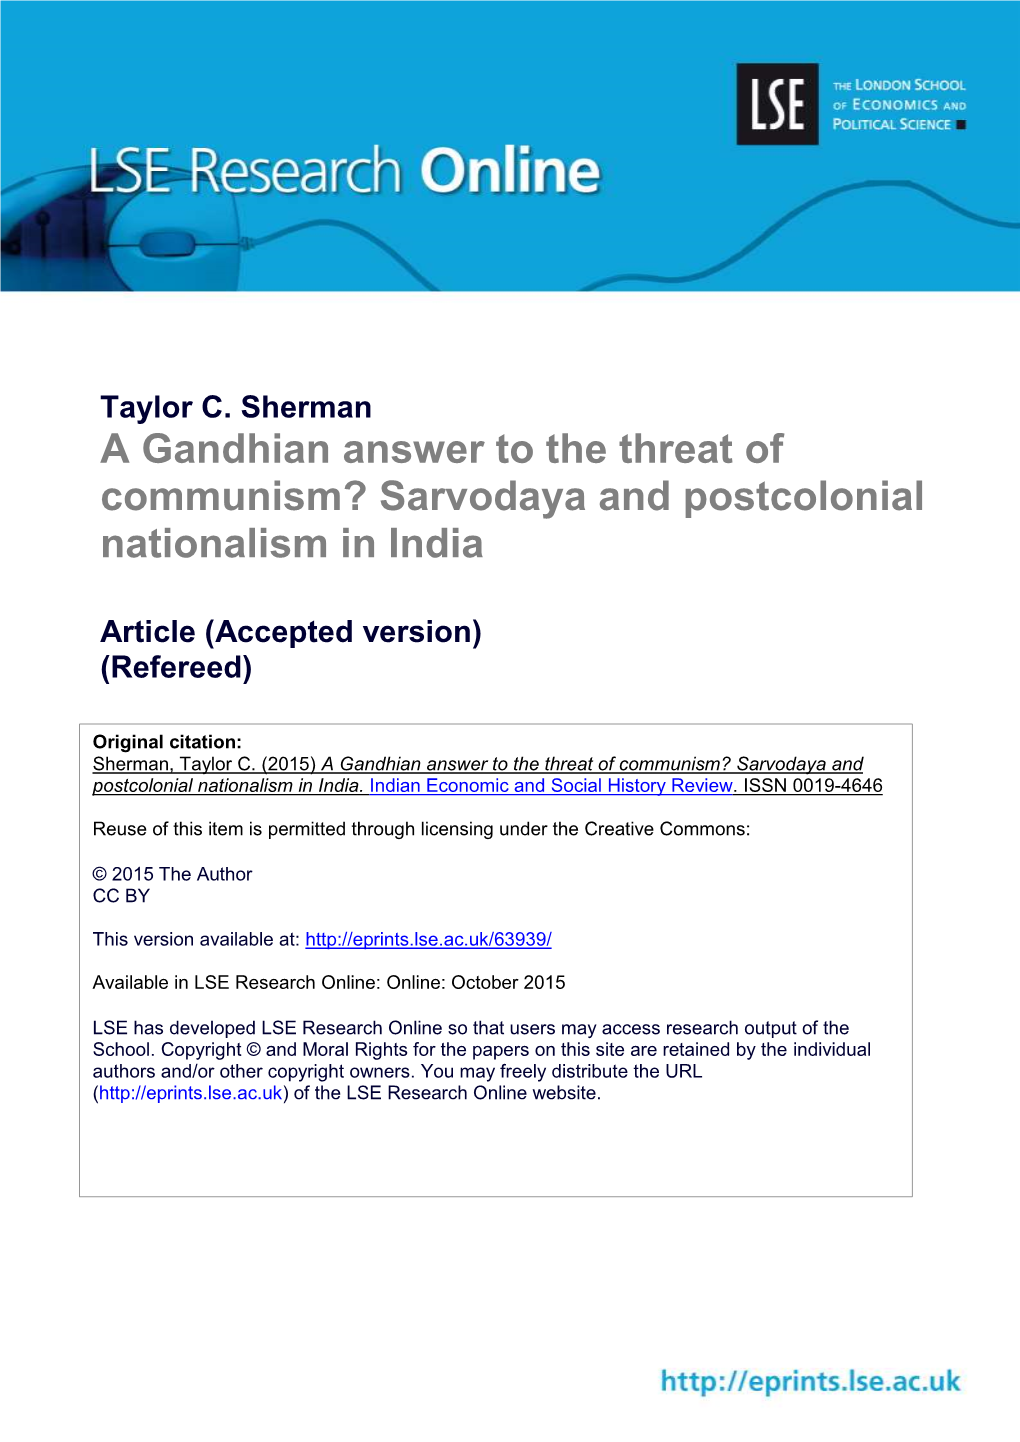 A Gandhian Answer to the Threat of Communism? Sarvodaya and Postcolonial Nationalism in India